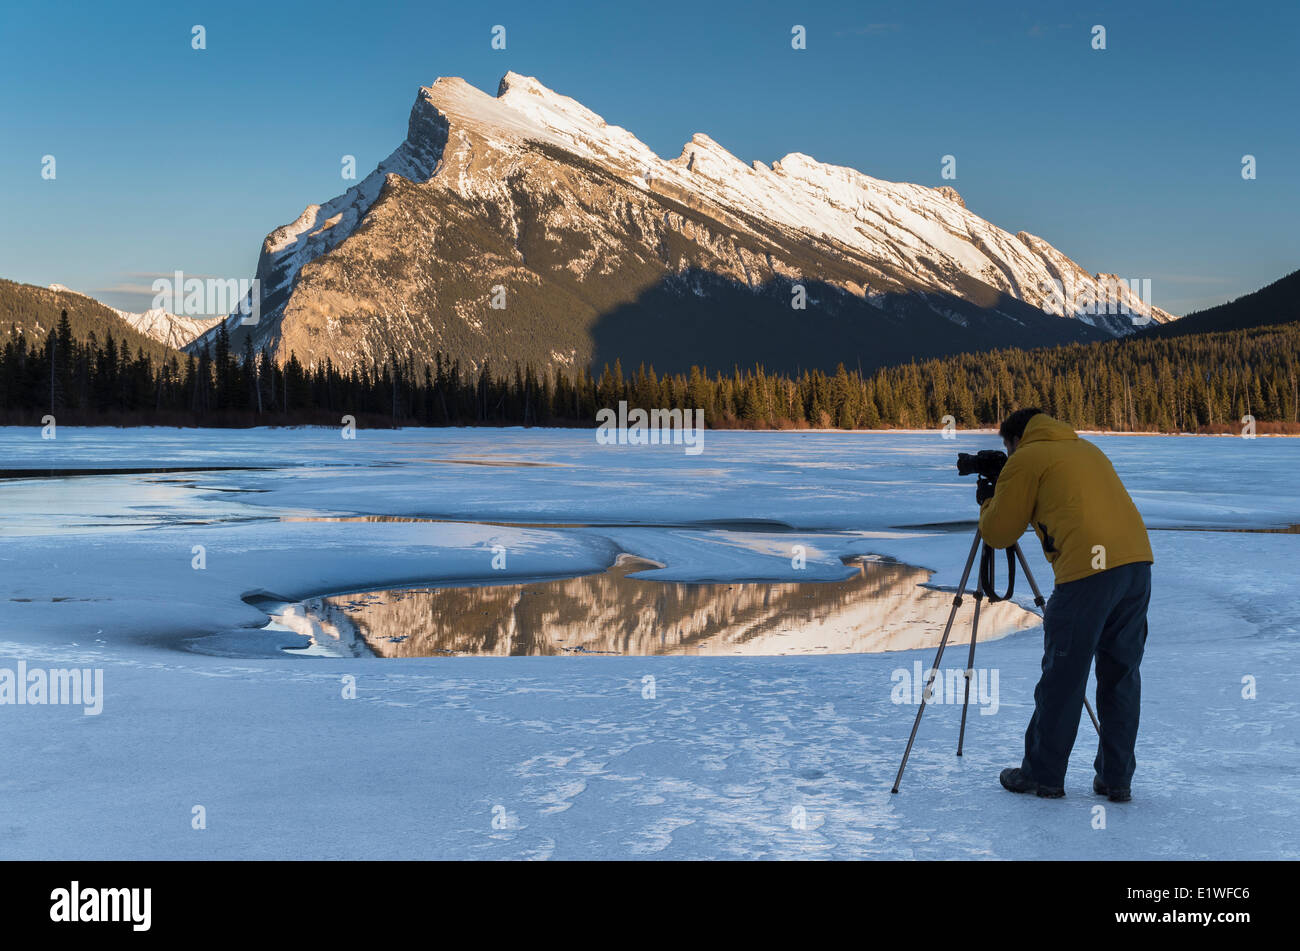 Photographer composing a photograph of Mount Rundle on frozen Vermilion Lakes in winter in Banff National Park, Alberta, Canada. Stock Photo